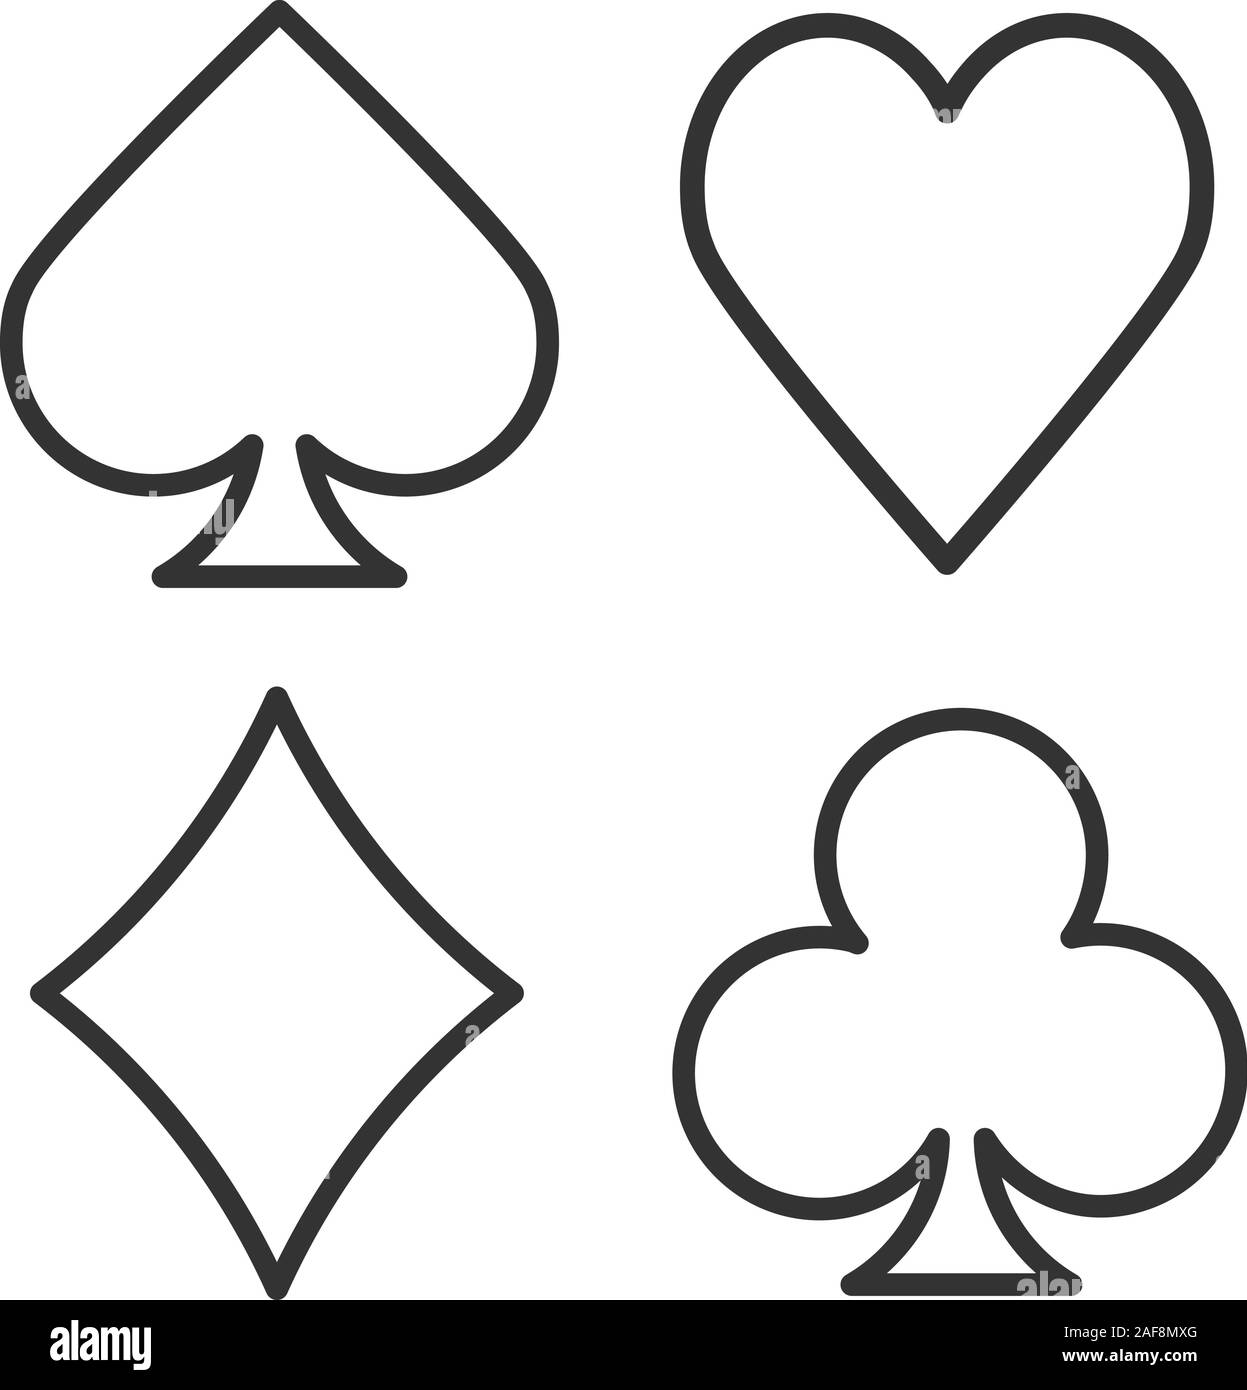 Suits of playing cards linear icon. Spade, clubs, heart, diamond. Thin ...